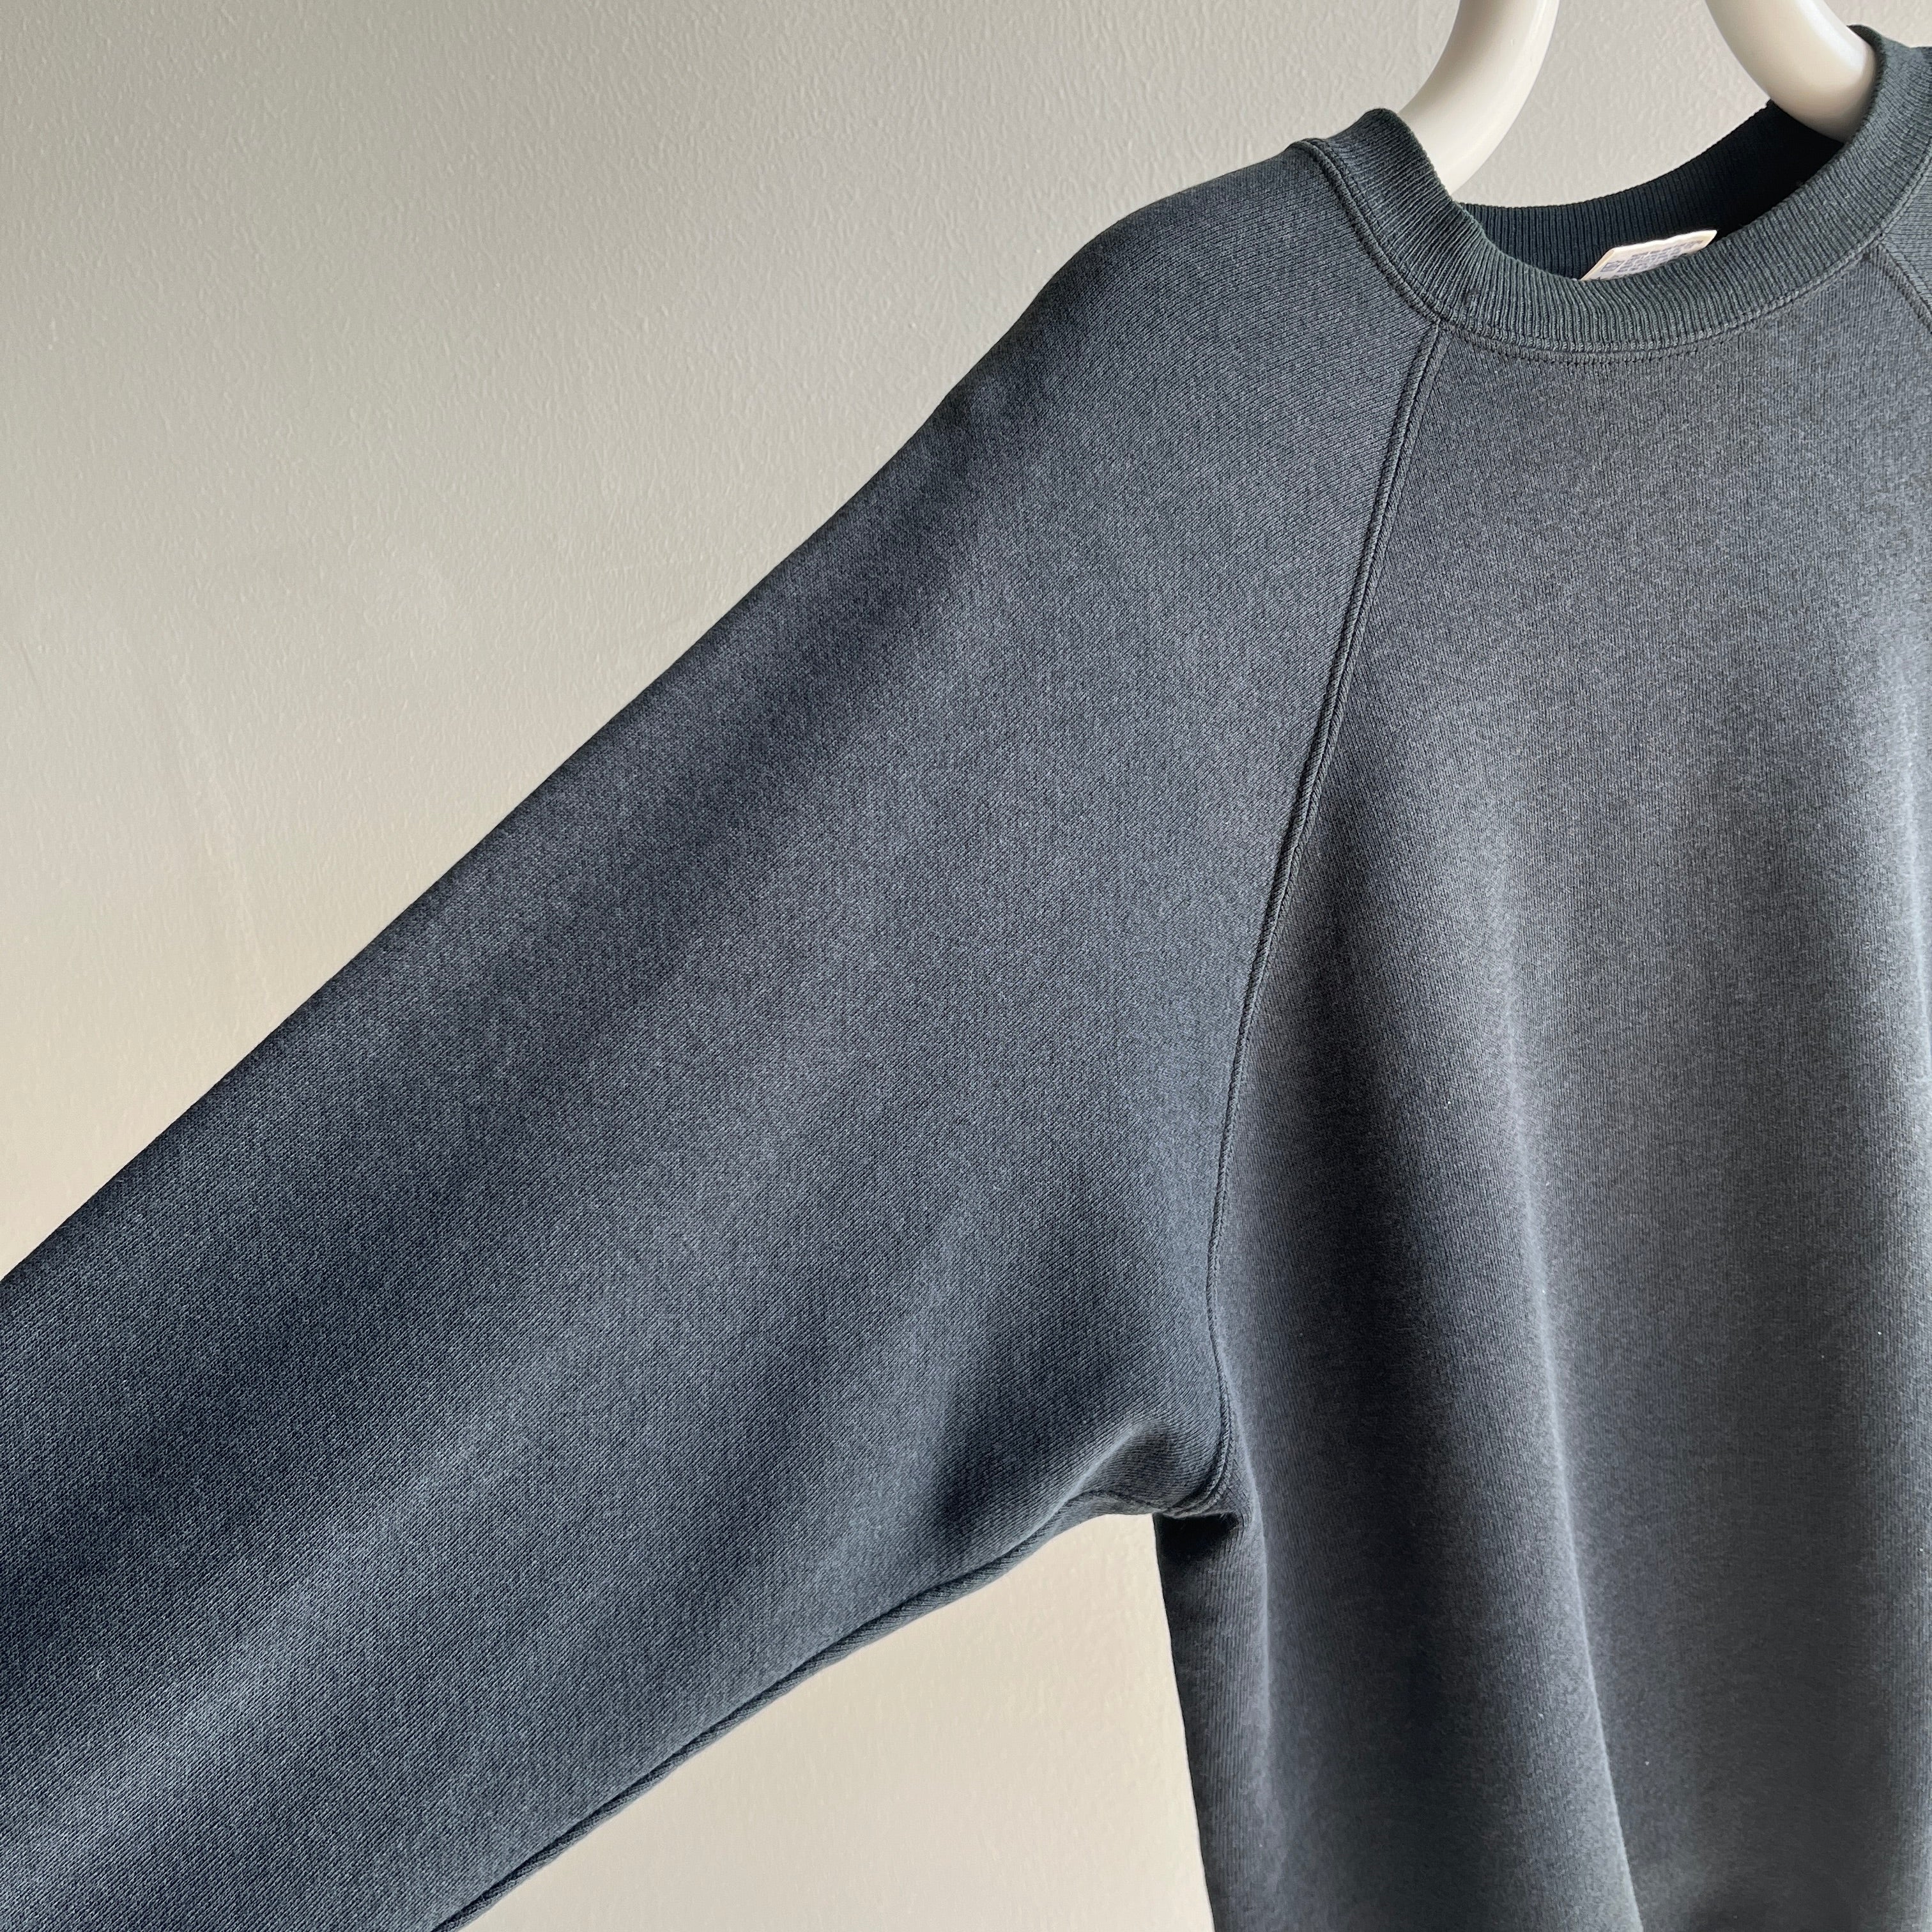 1990s Hanes Luxurious Faded Black Raglan with a Nice Lower Pit for Maximum Comfort - So. Soft.